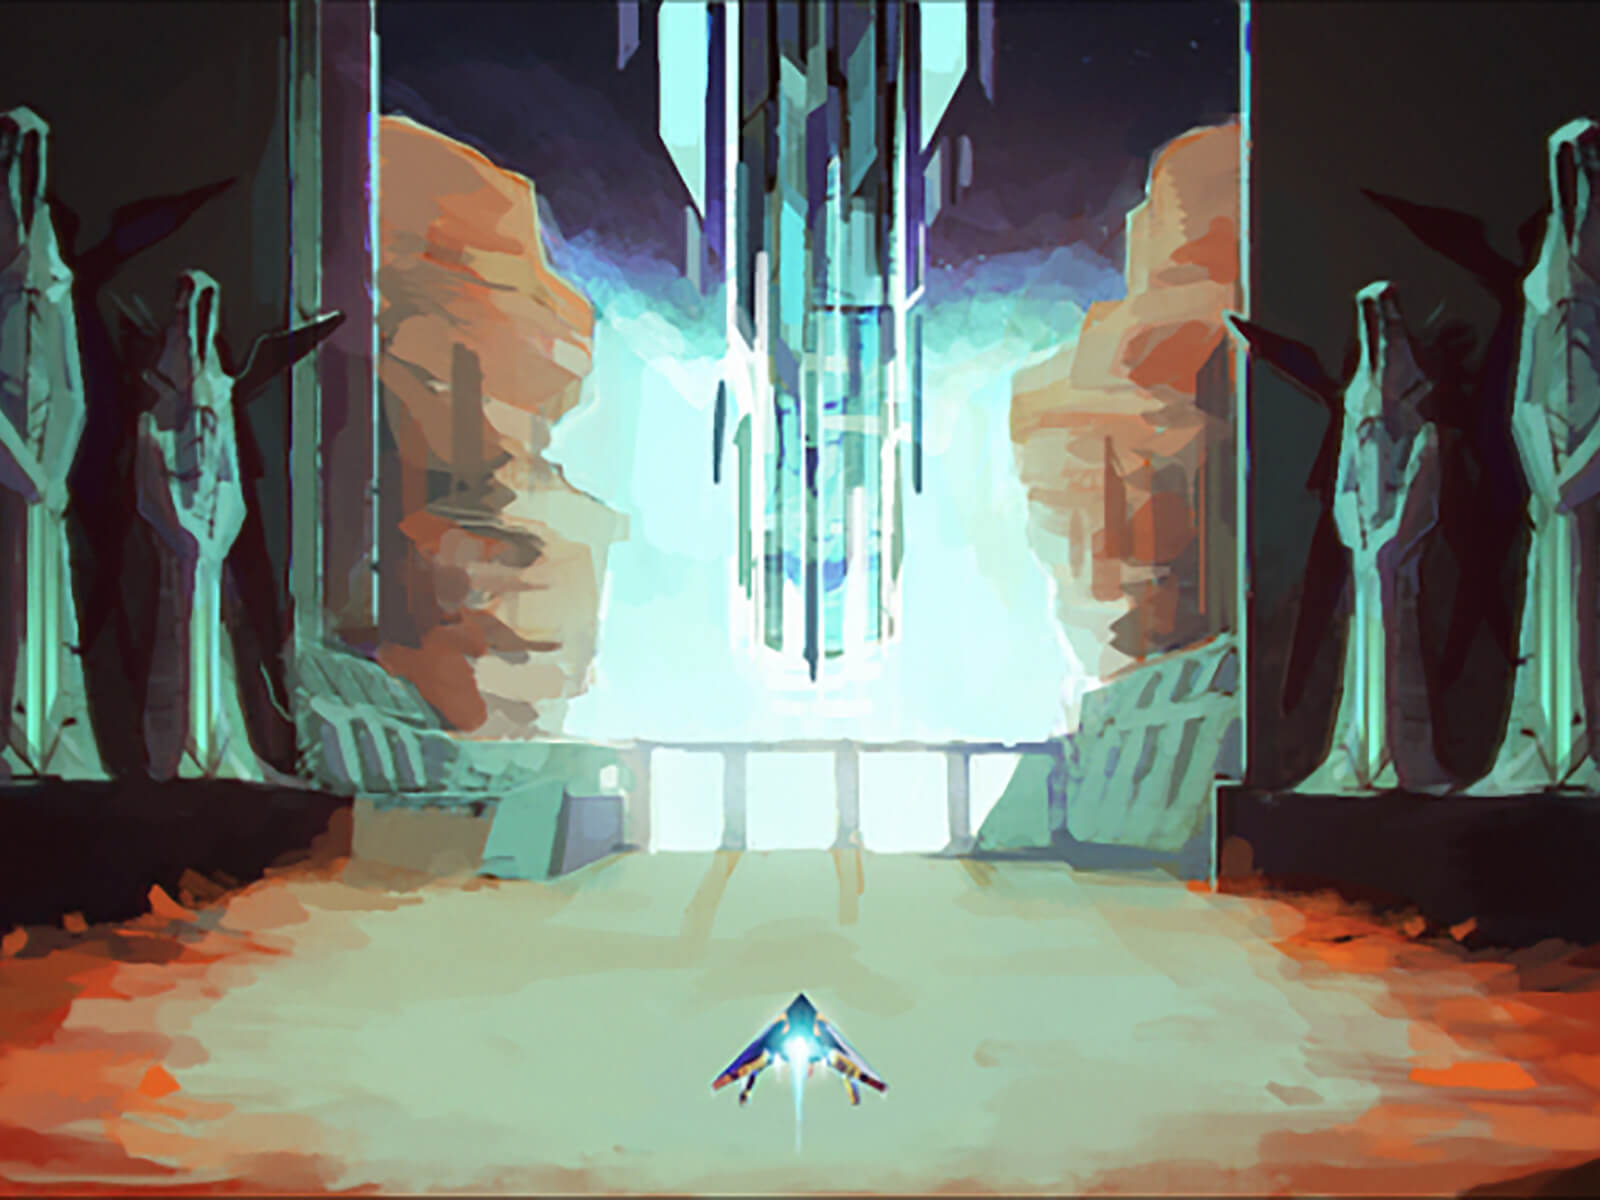 Digital painting of a hovercraft vehicle at the entrance of a vast chamber, flanked by large statues of alien hooded figures.